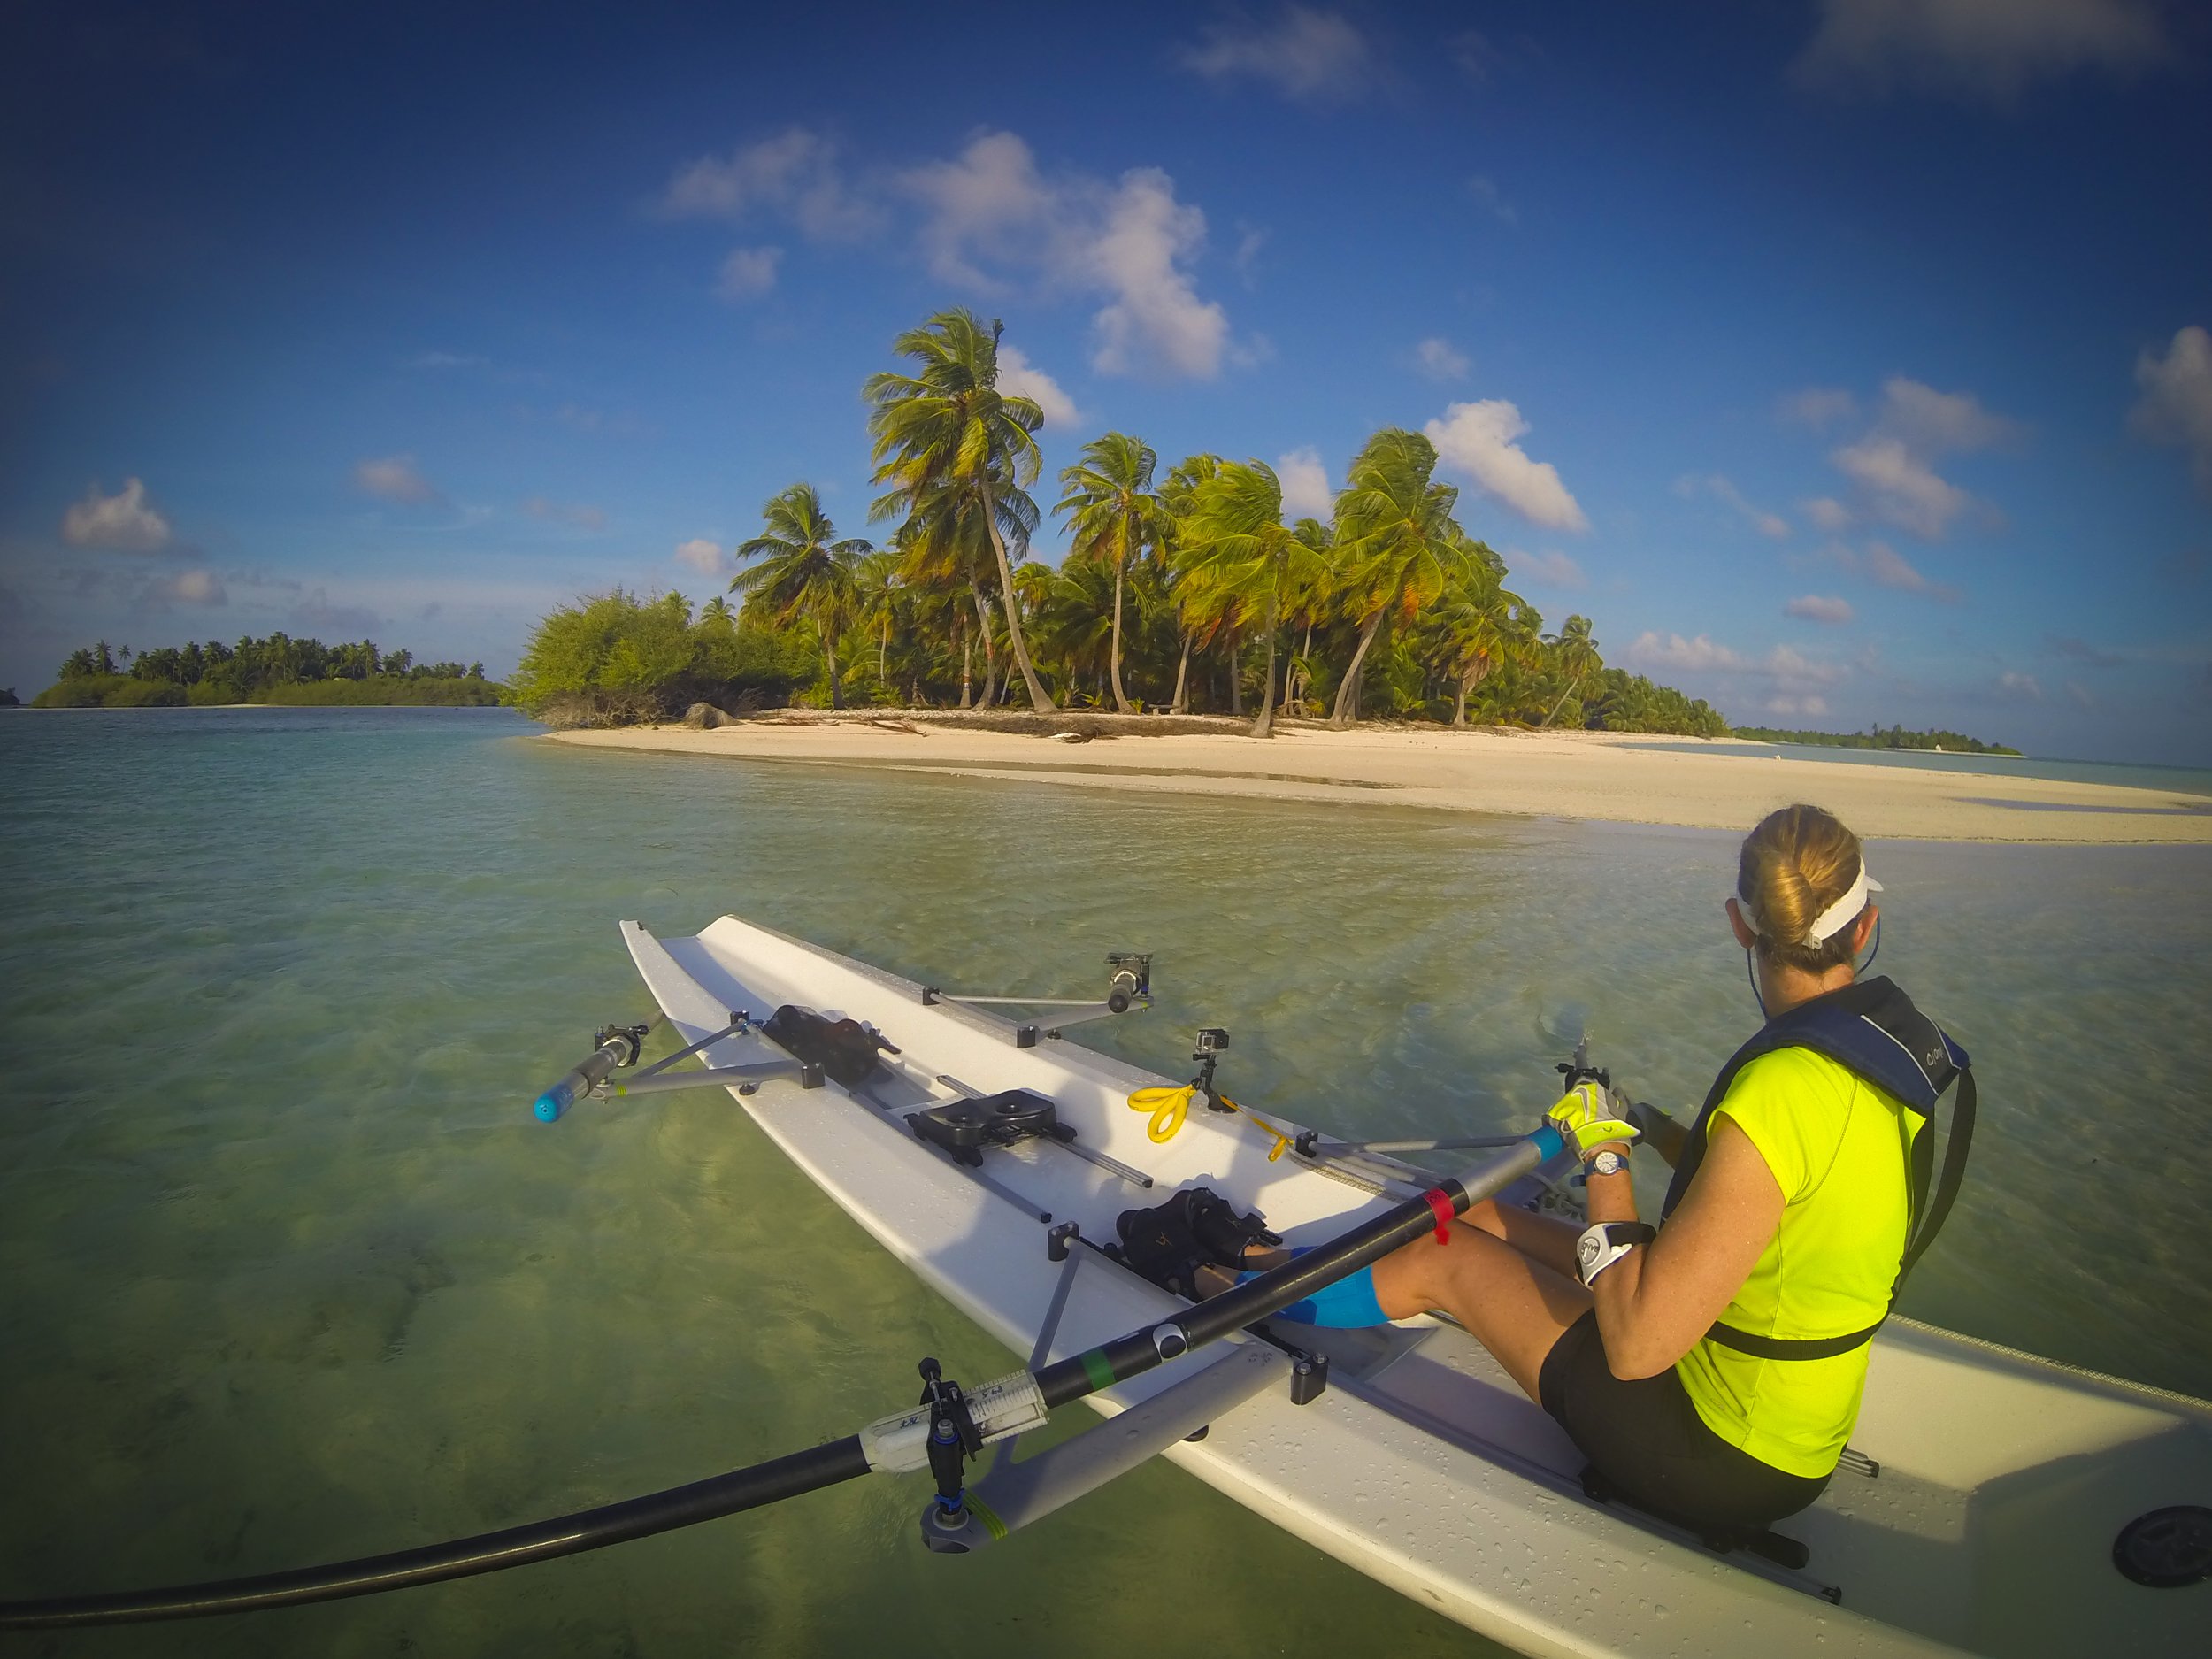  Traveling and rowing in the Maldives, where Sharon met OWRC member, Liz Kantor.  